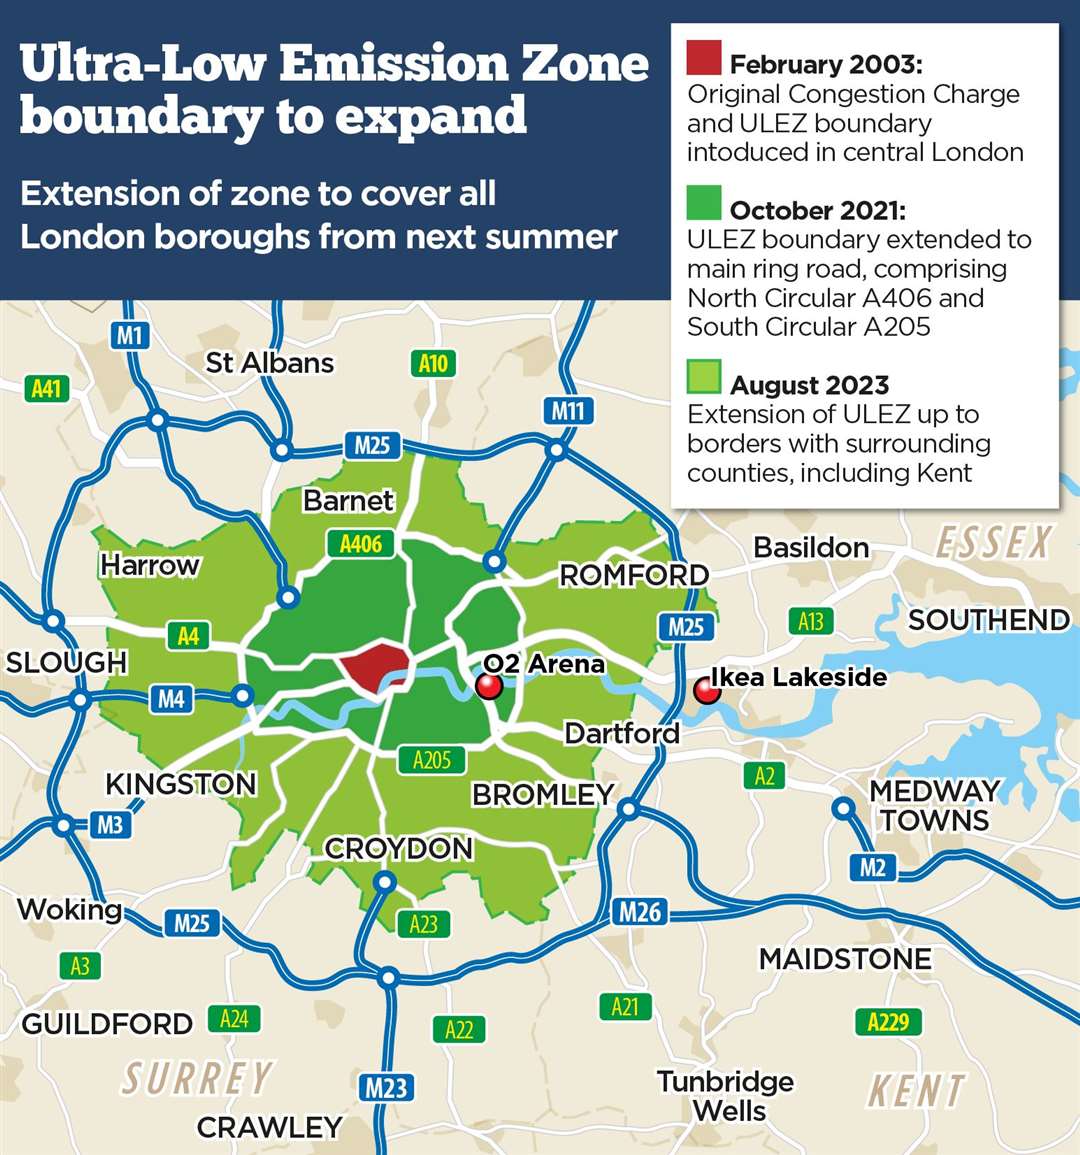 The ULEZ is expanding in August as part of changes ushered in by the London Mayor